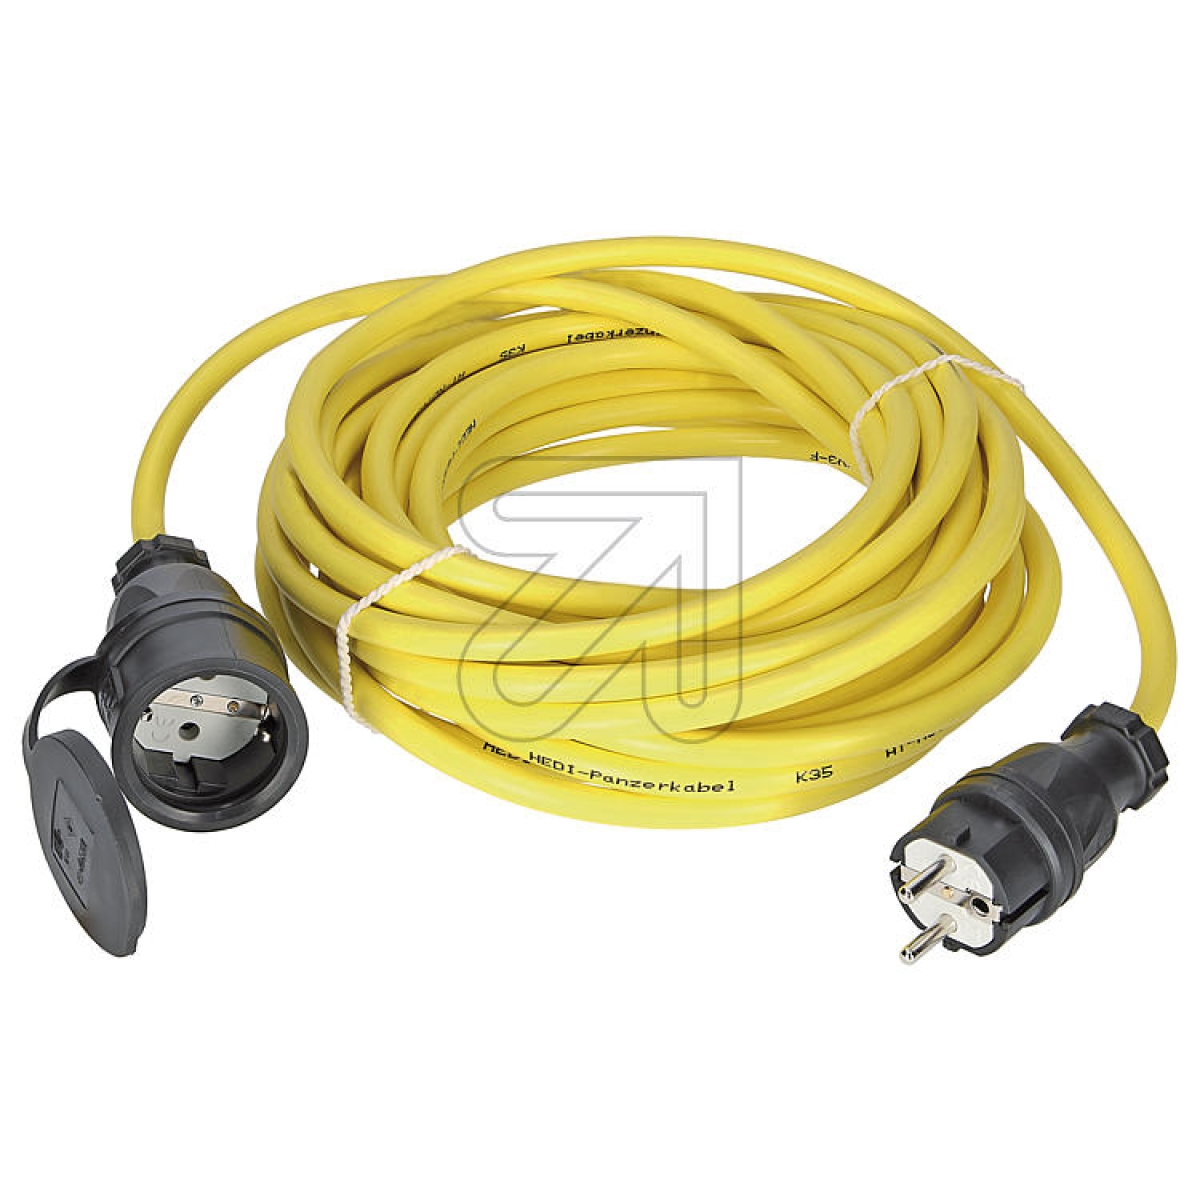 Hediarmored cable extension line 10m AT-N07V3V3-F 3G1.5Article-No: 042830